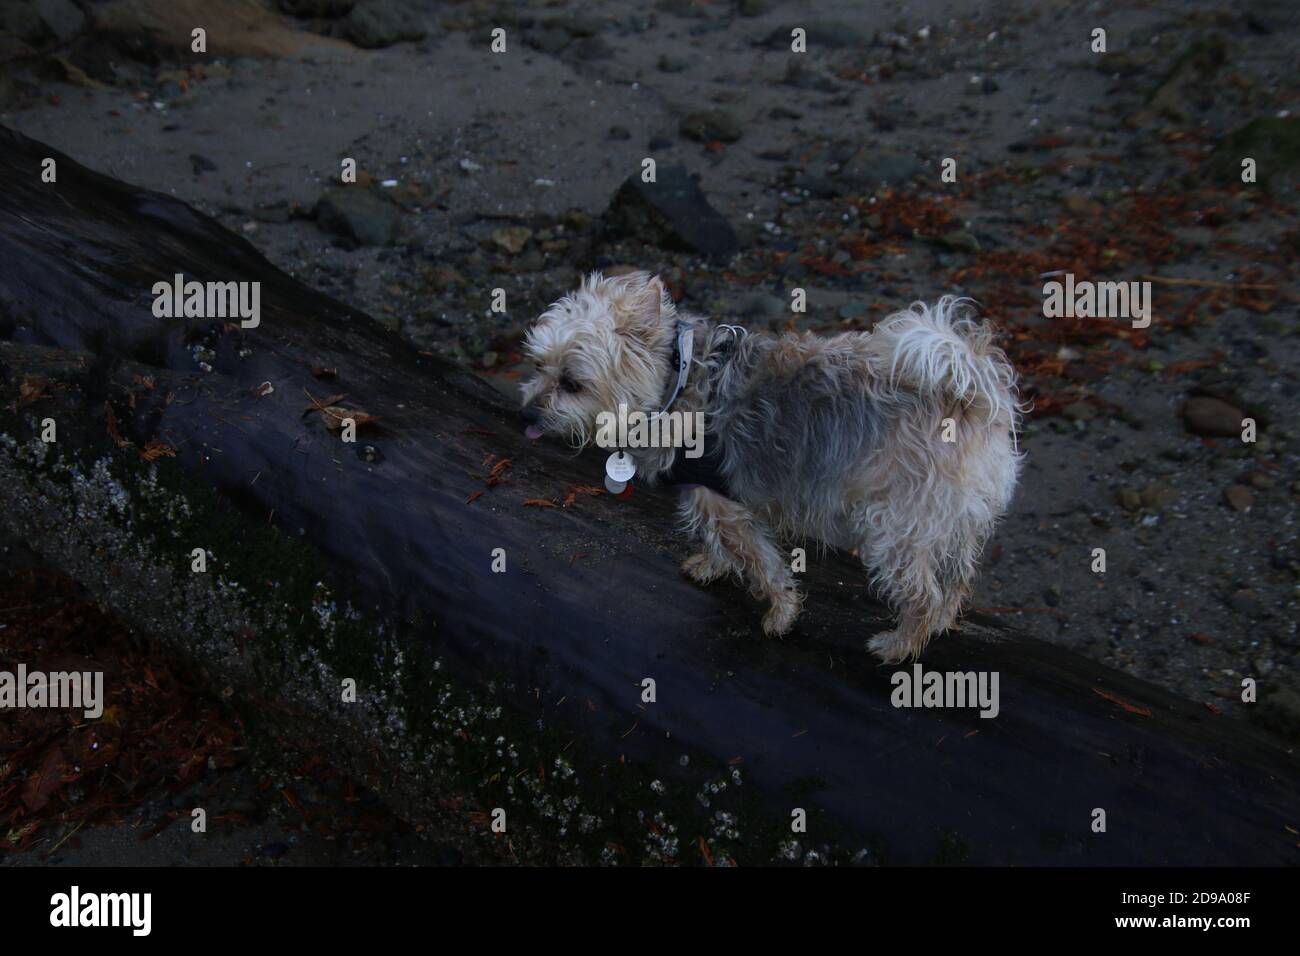 A silky terrier X walking on a wet log laying in the sand Tag saying Annual renewal required in english no other readable text Stock Photo